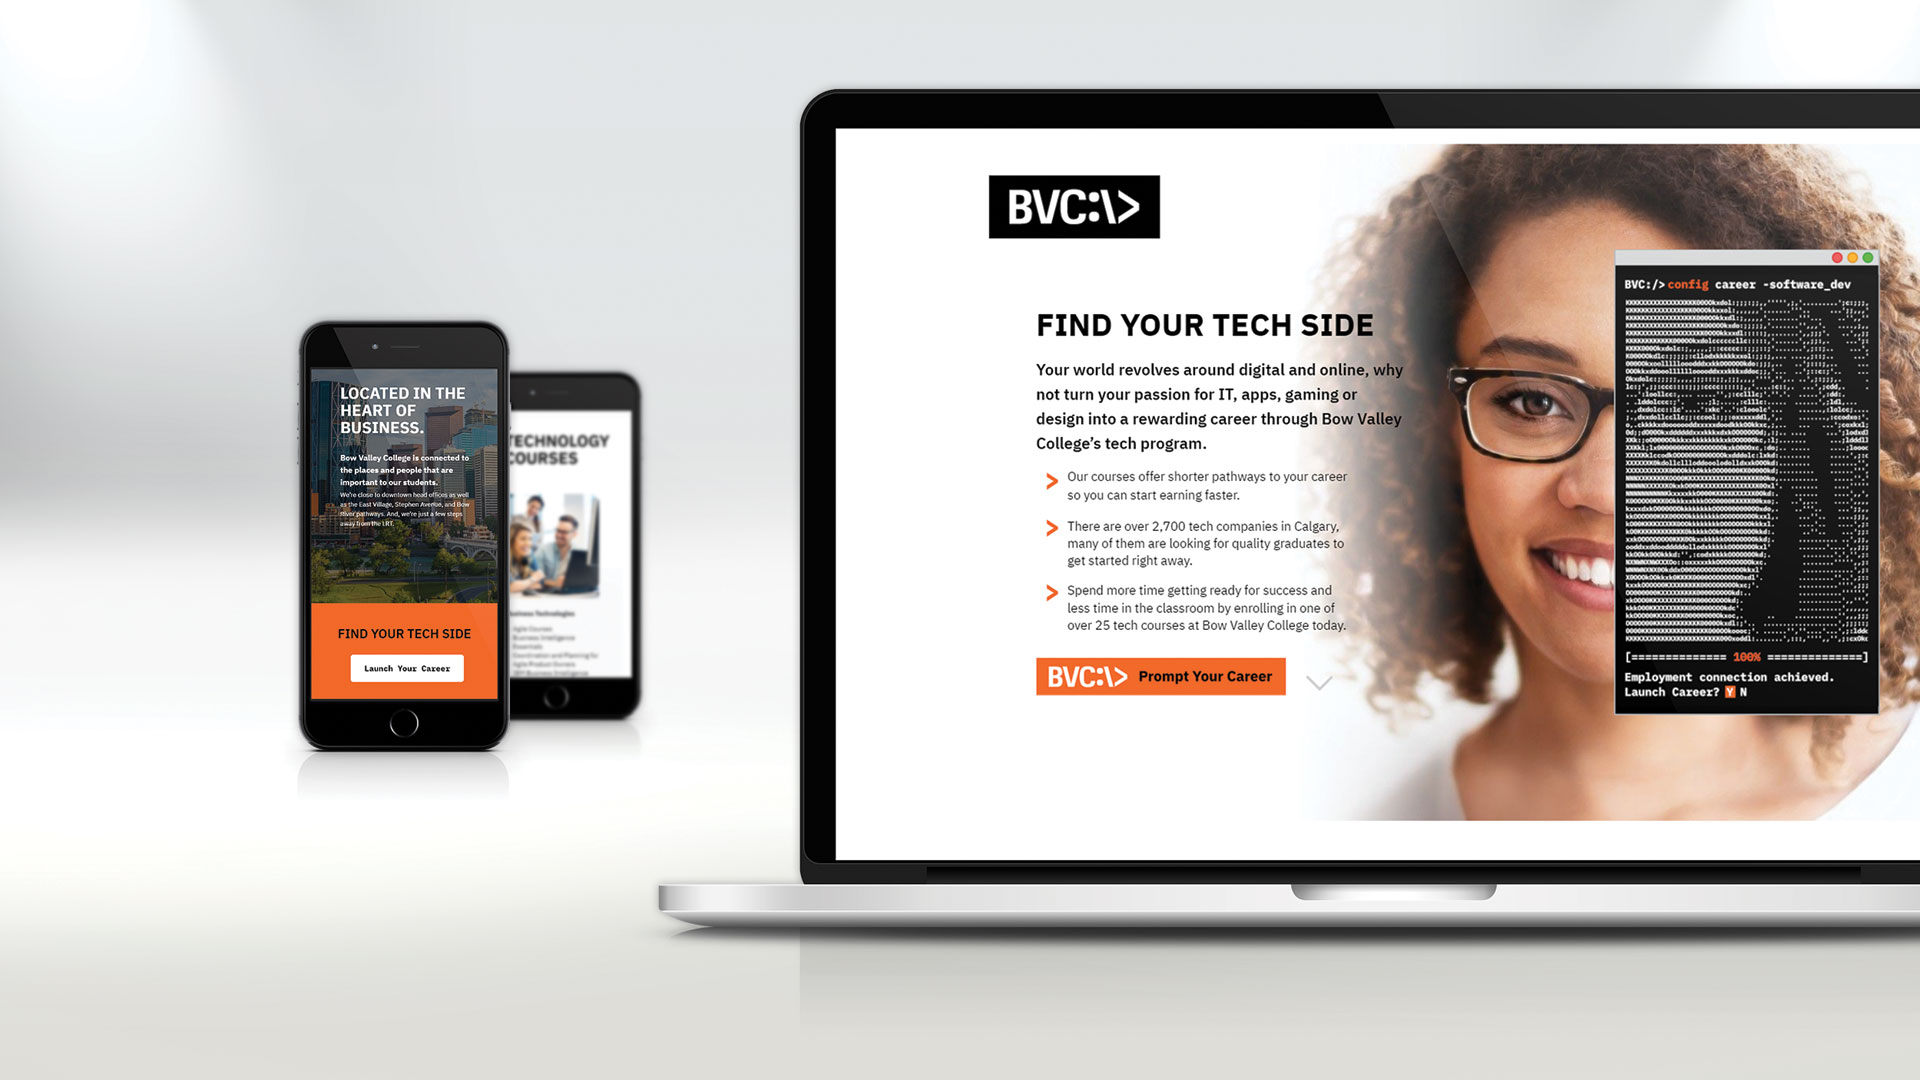 Bow Valley College - Find Your Tech Side Campaign Site